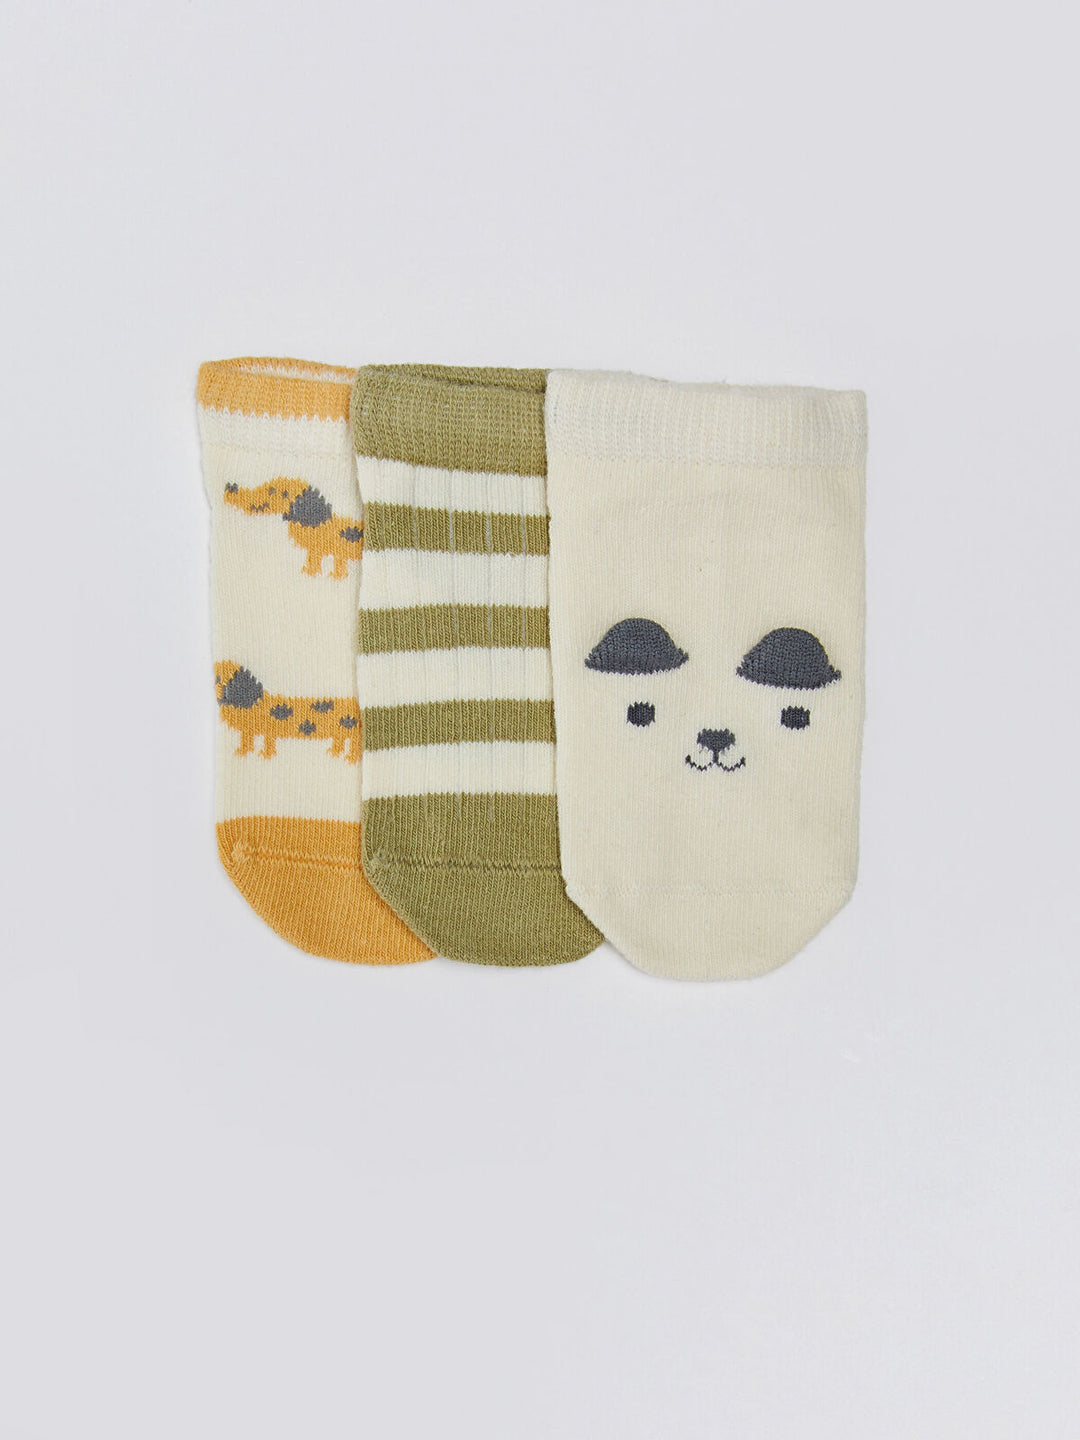 Patterned Baby Boy Booties Socks 3 Pieces